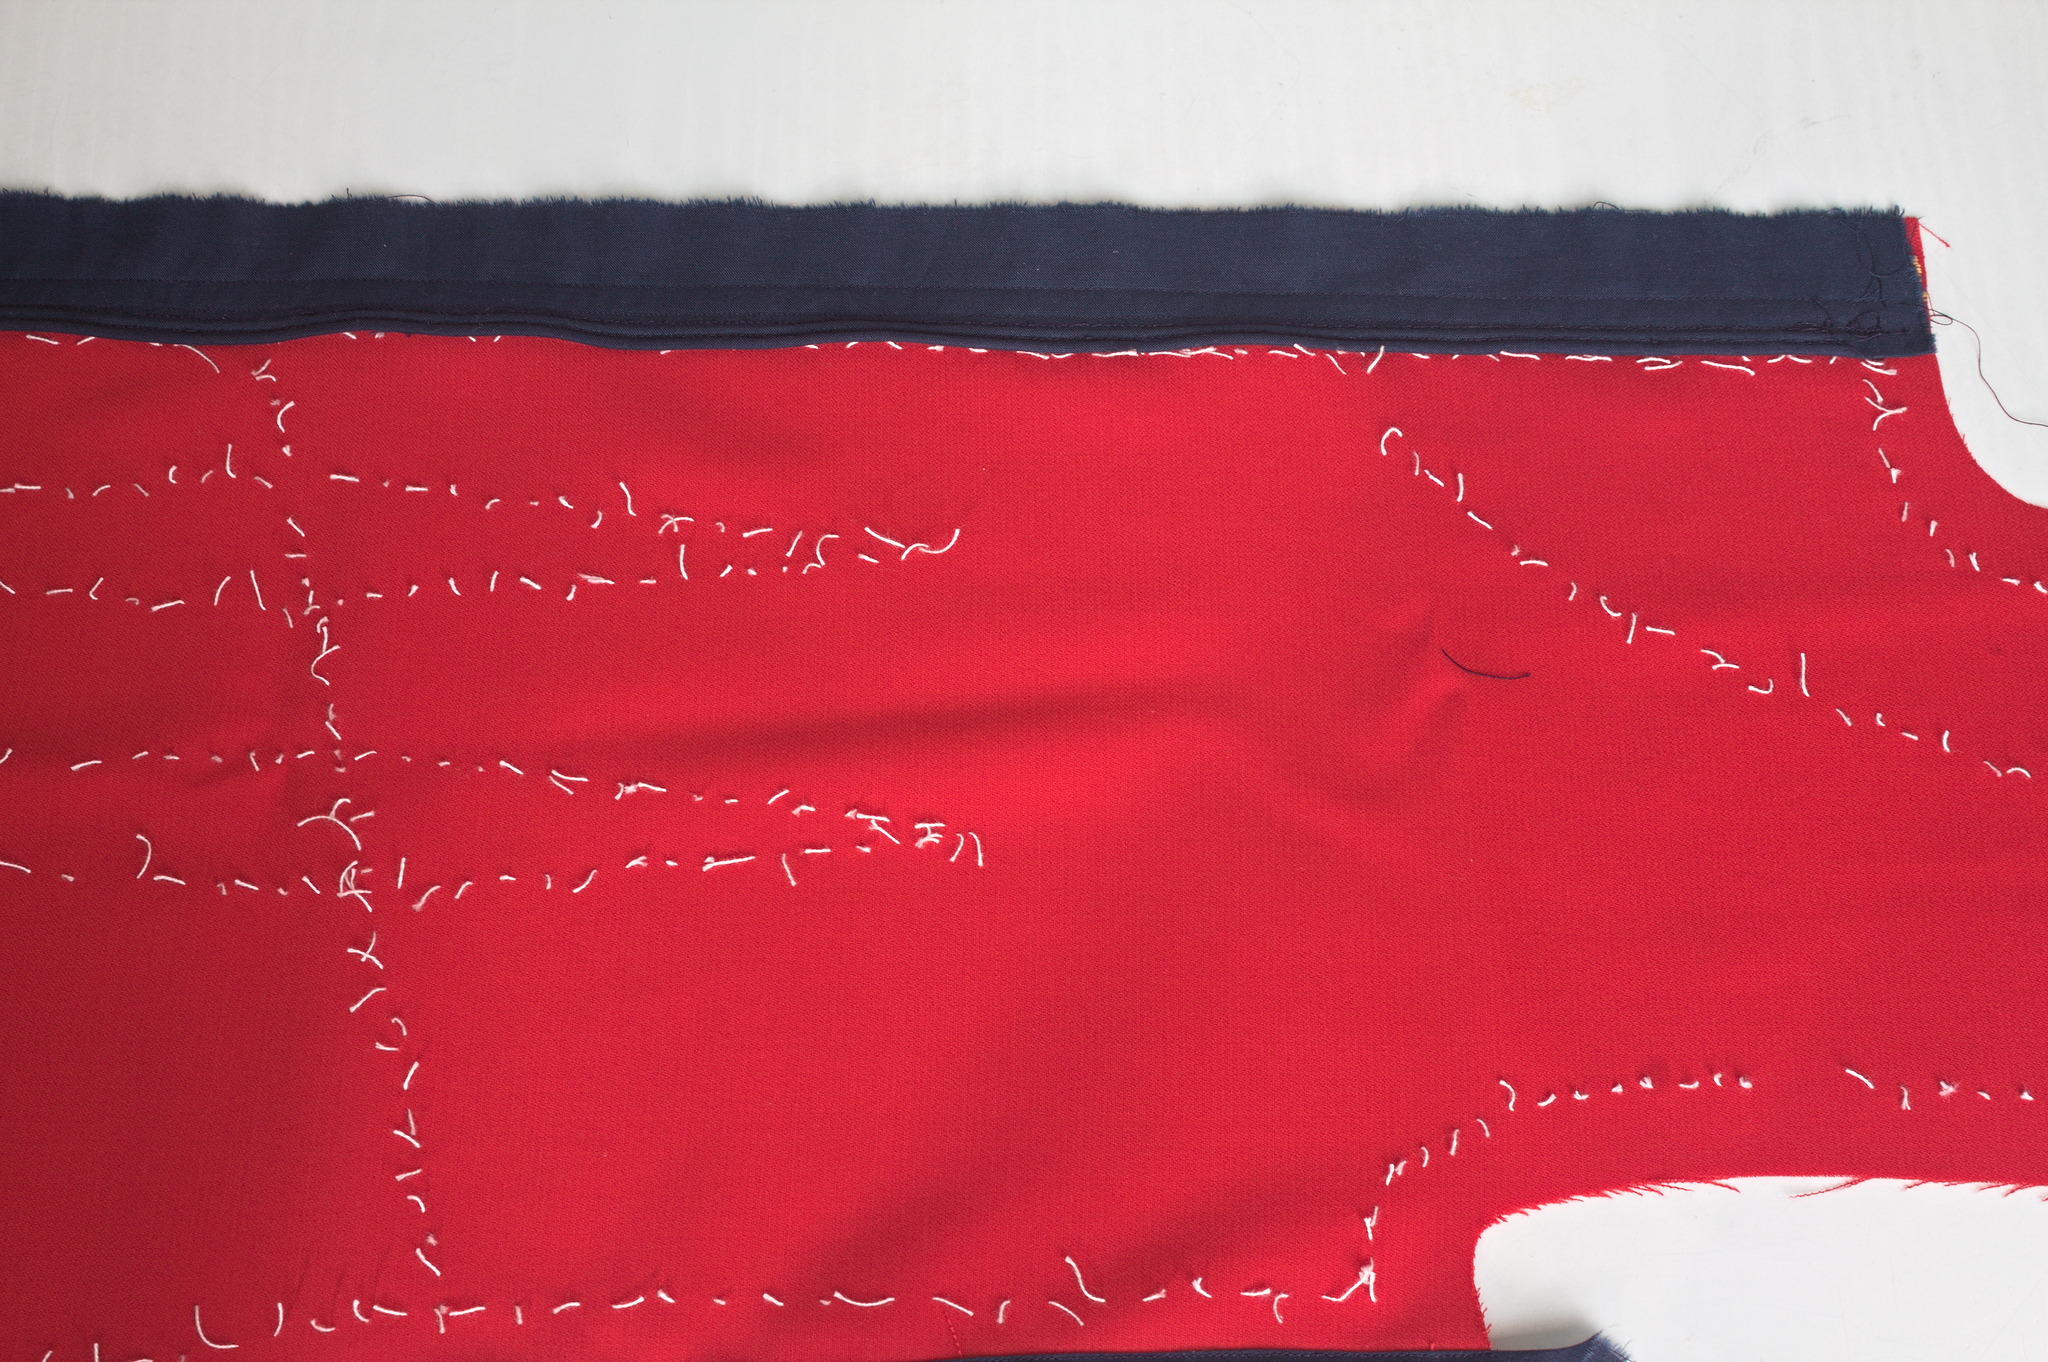 A bigger piece of fabric with tailor's tacks for the seams and
darts; at the top edge there is a strip of navy blue fabric sewn
to a wide seaming allowance, with two rows of cording closest to
the center front line.